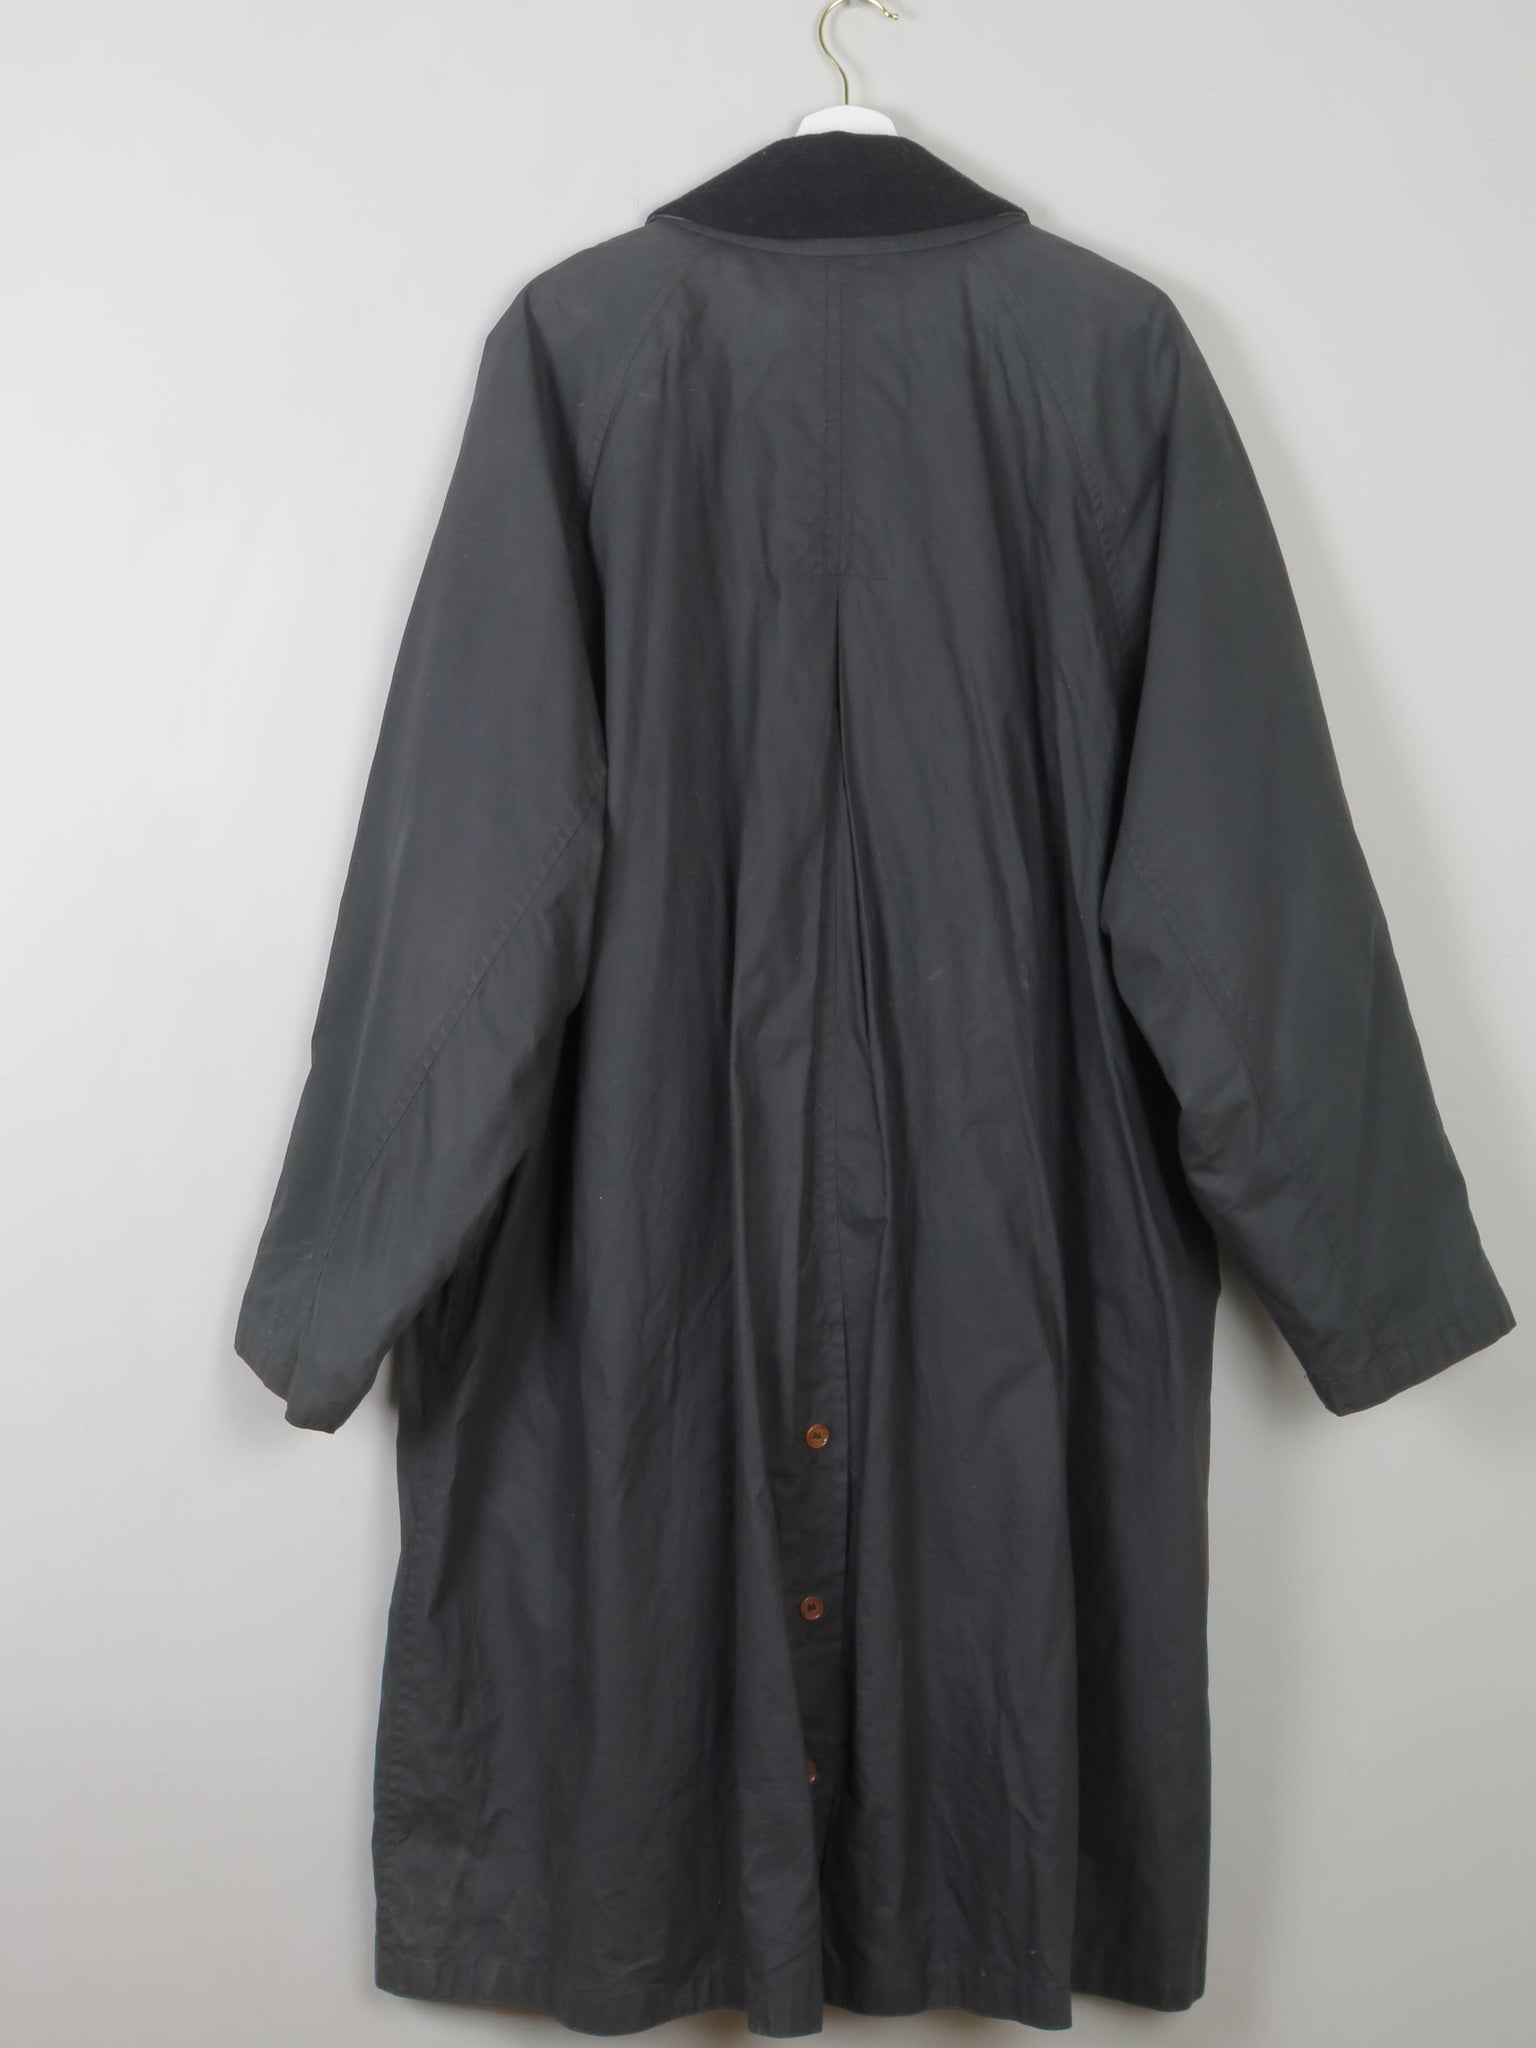 Men's Green Waxed Lined Trench Coat L/XL - The Harlequin